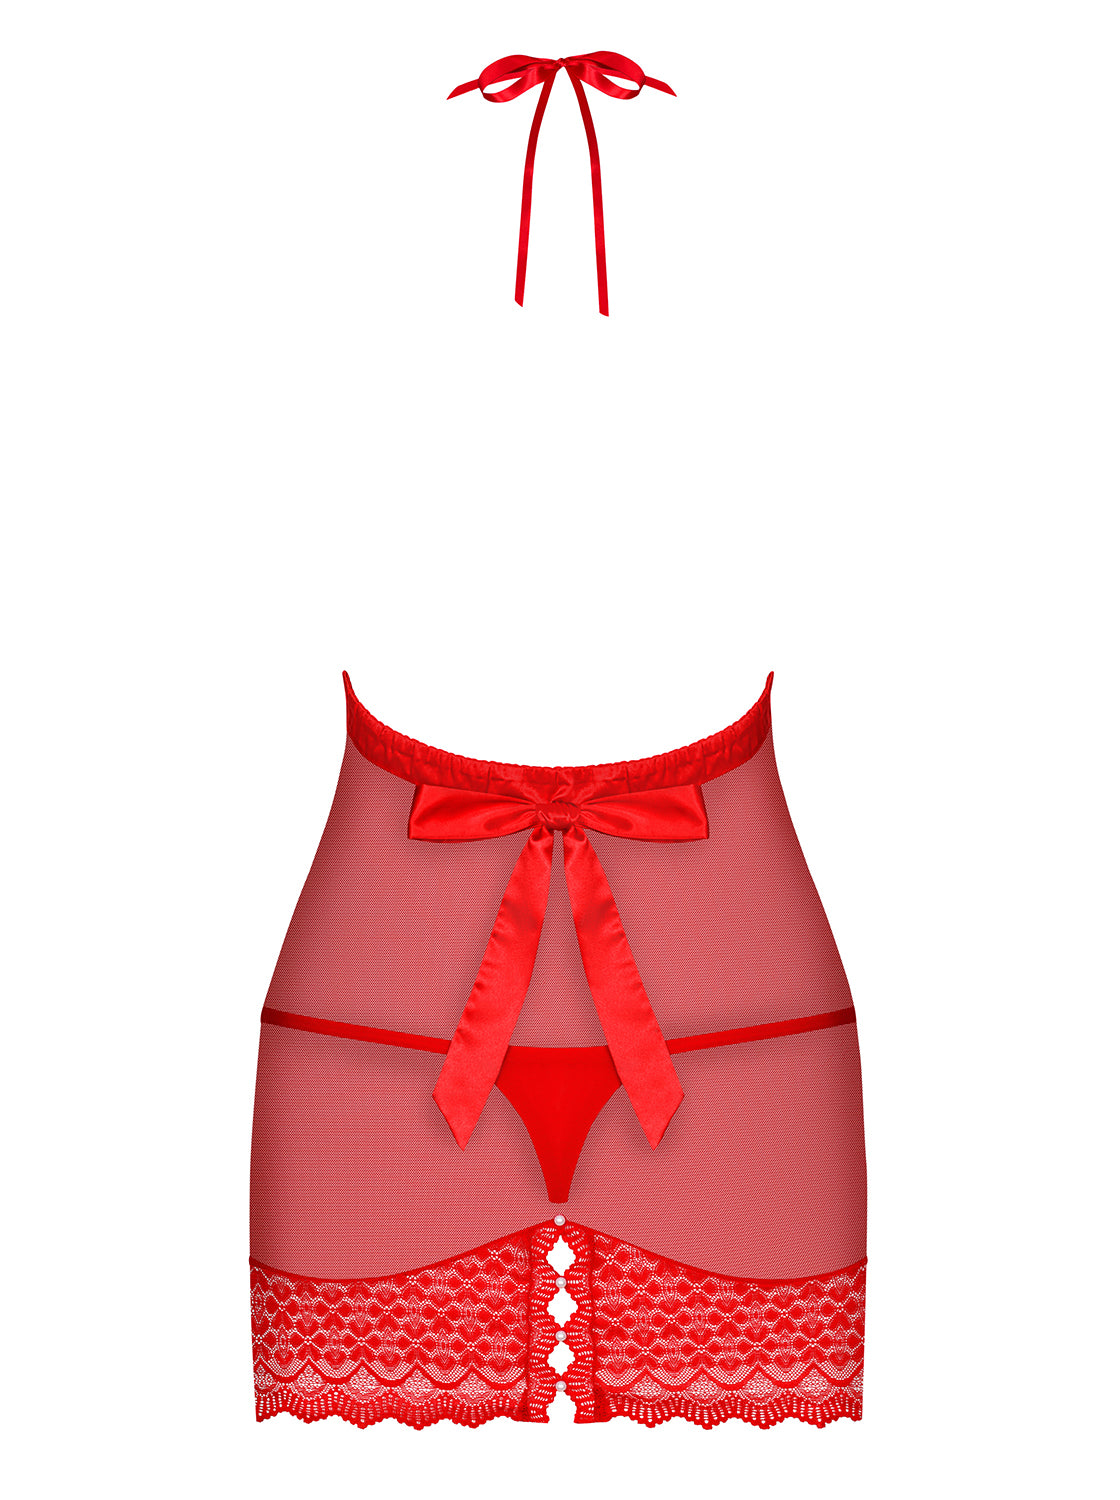 Sultry Red Set Chemise and Thong